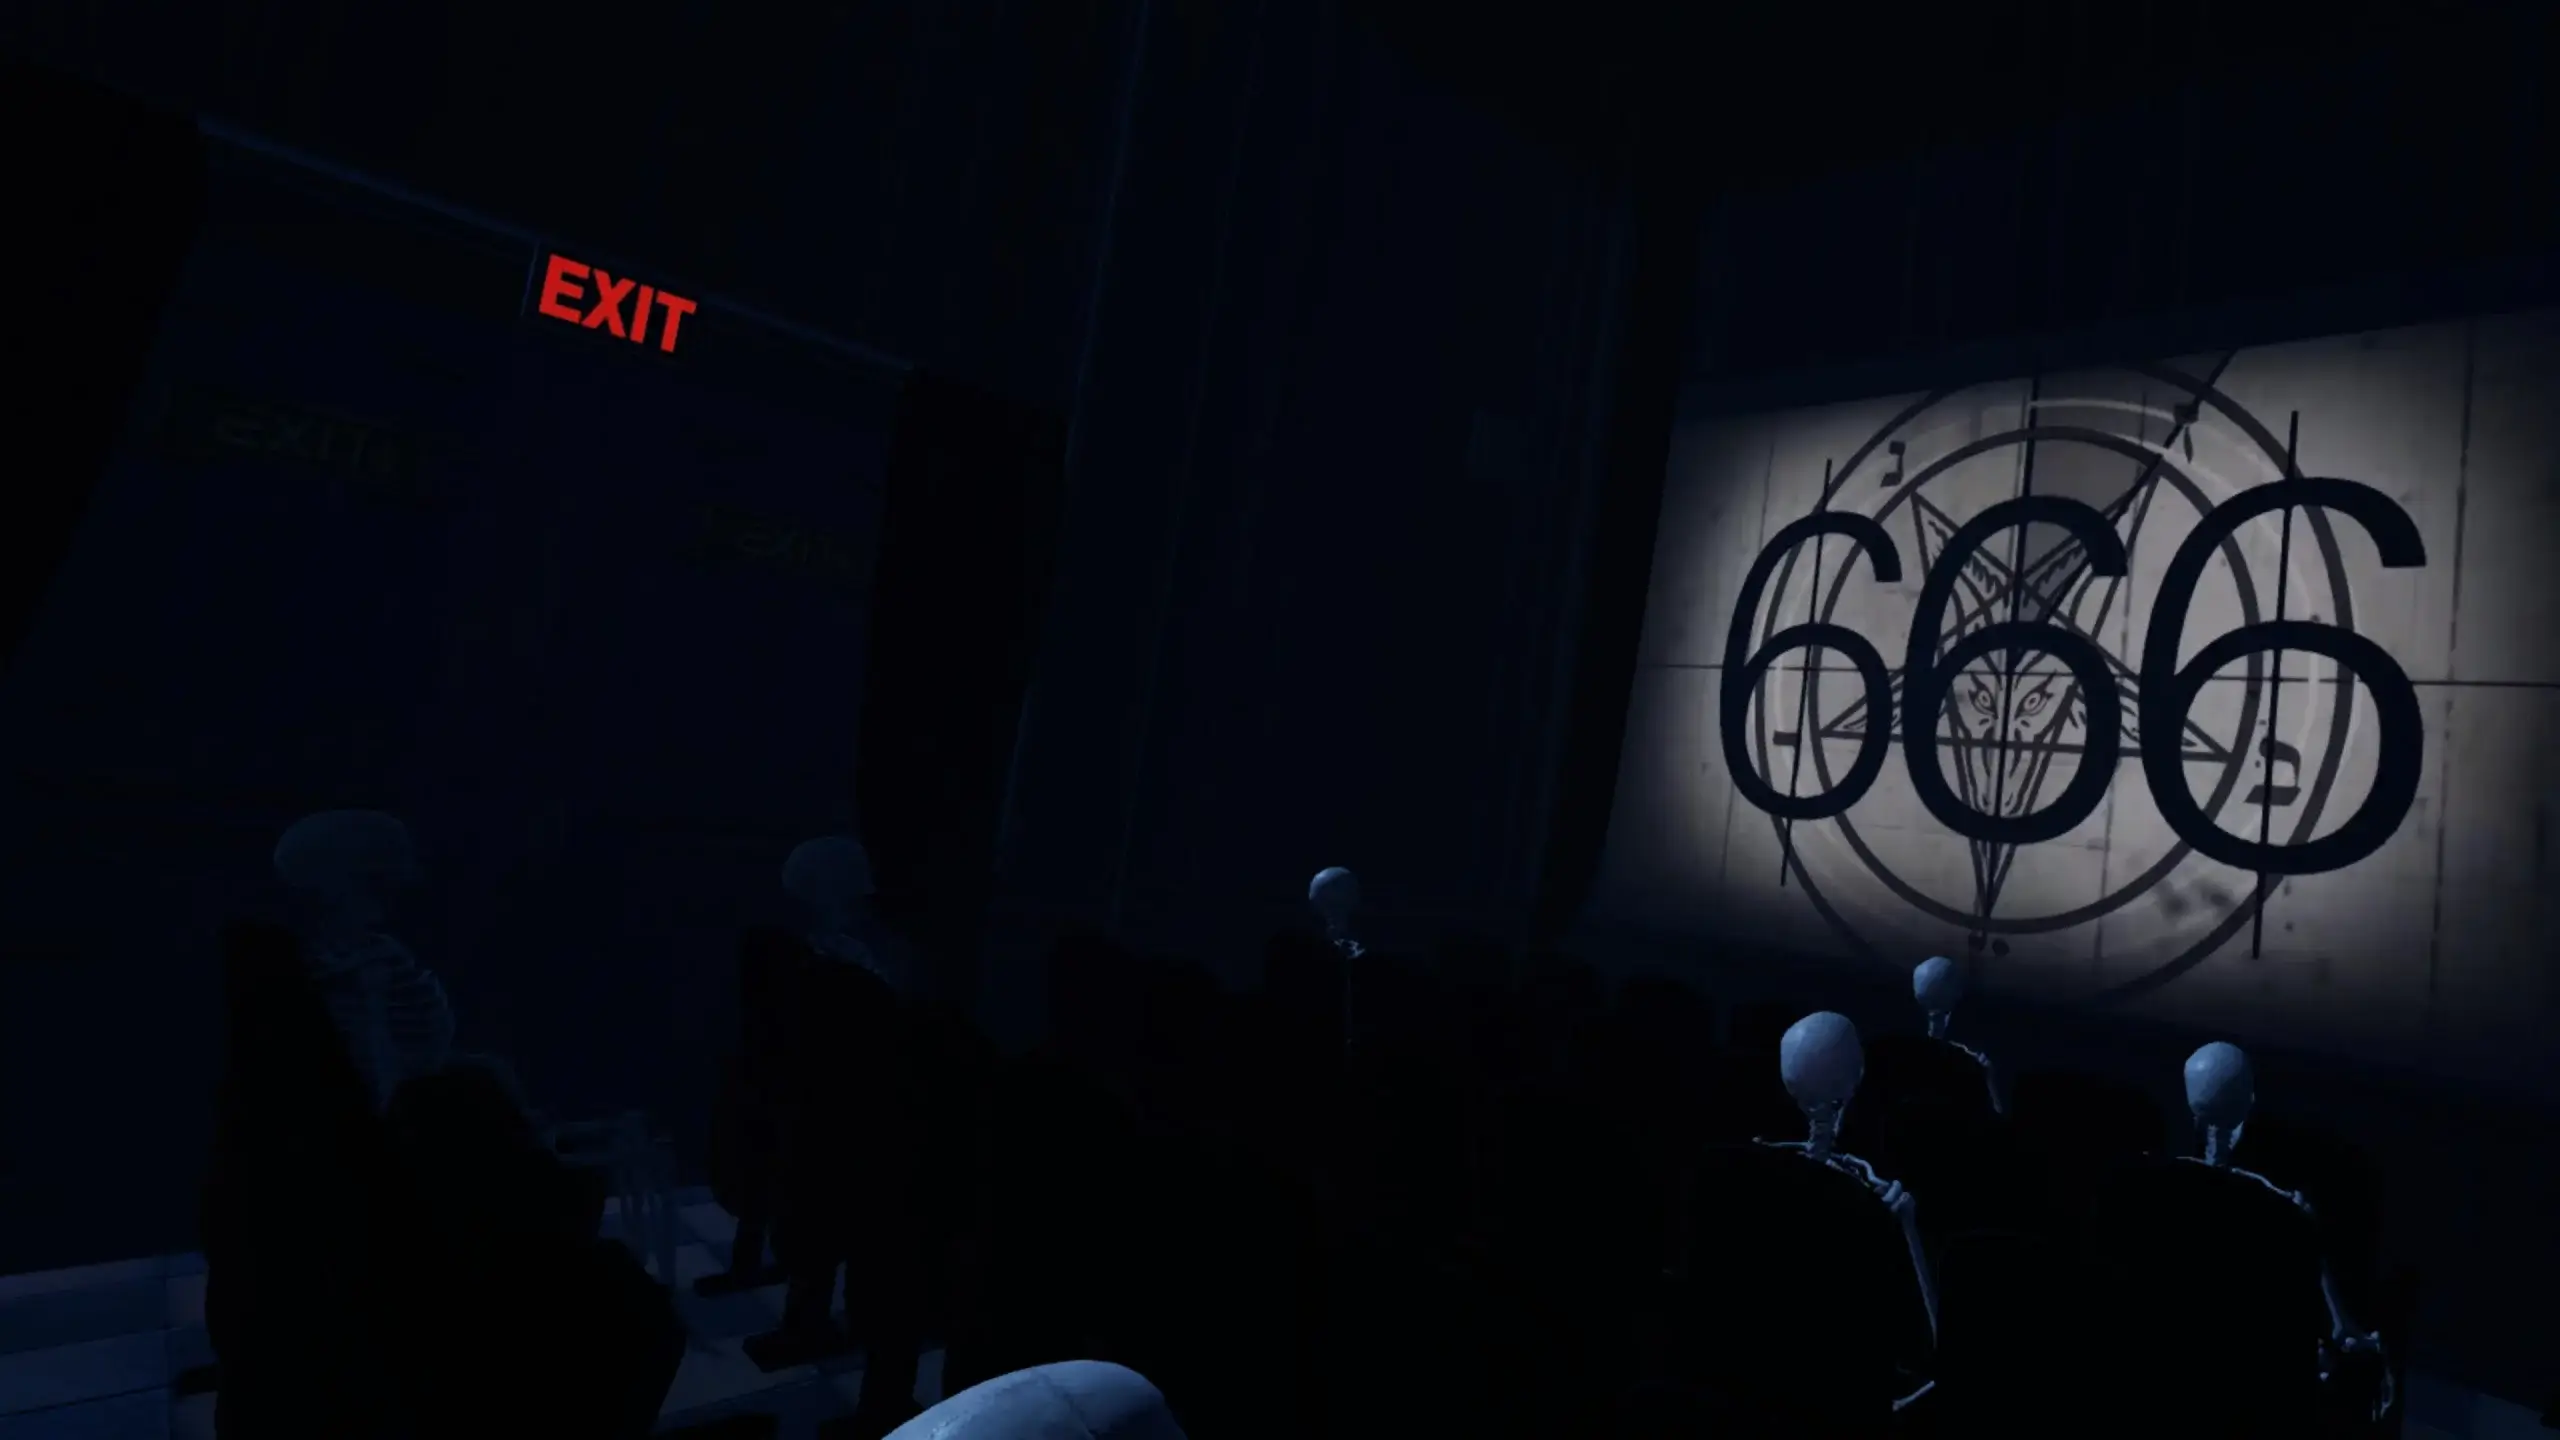 An Eerie cinema seat with animtronics facing a screen which is lit up and has the number 666 in a large print. The cinema is dark with the only lighting coming from the lit screen and the word Exit is noticable in a red font.